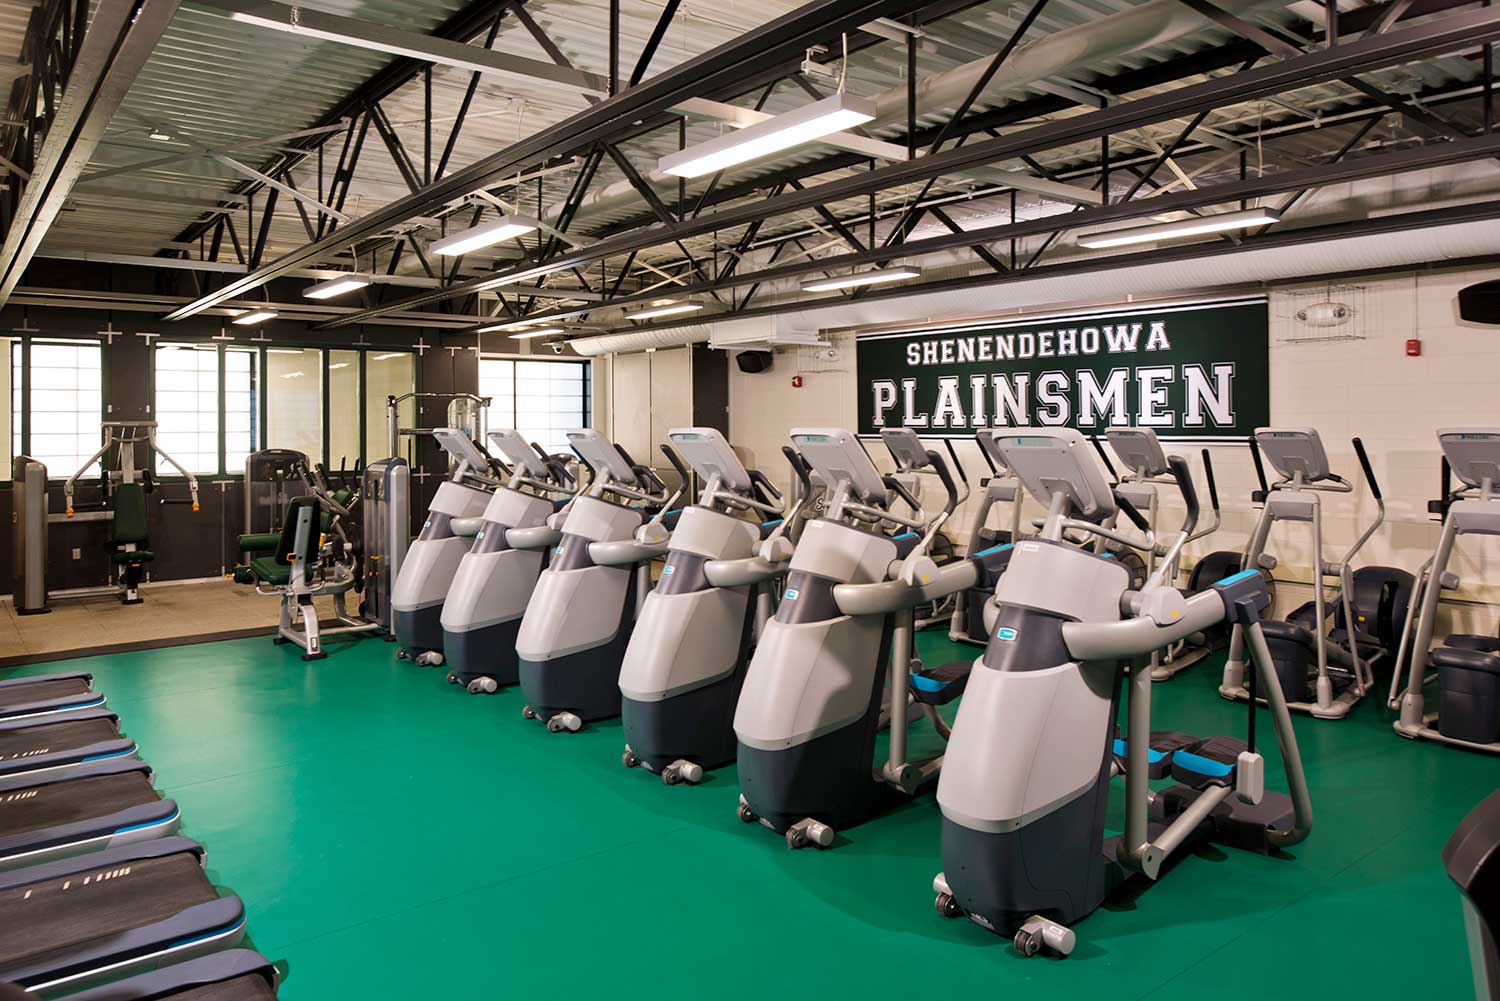 The fitness center Mosaic designed for Shenendehowa is arranged for multi-purpose and community use.